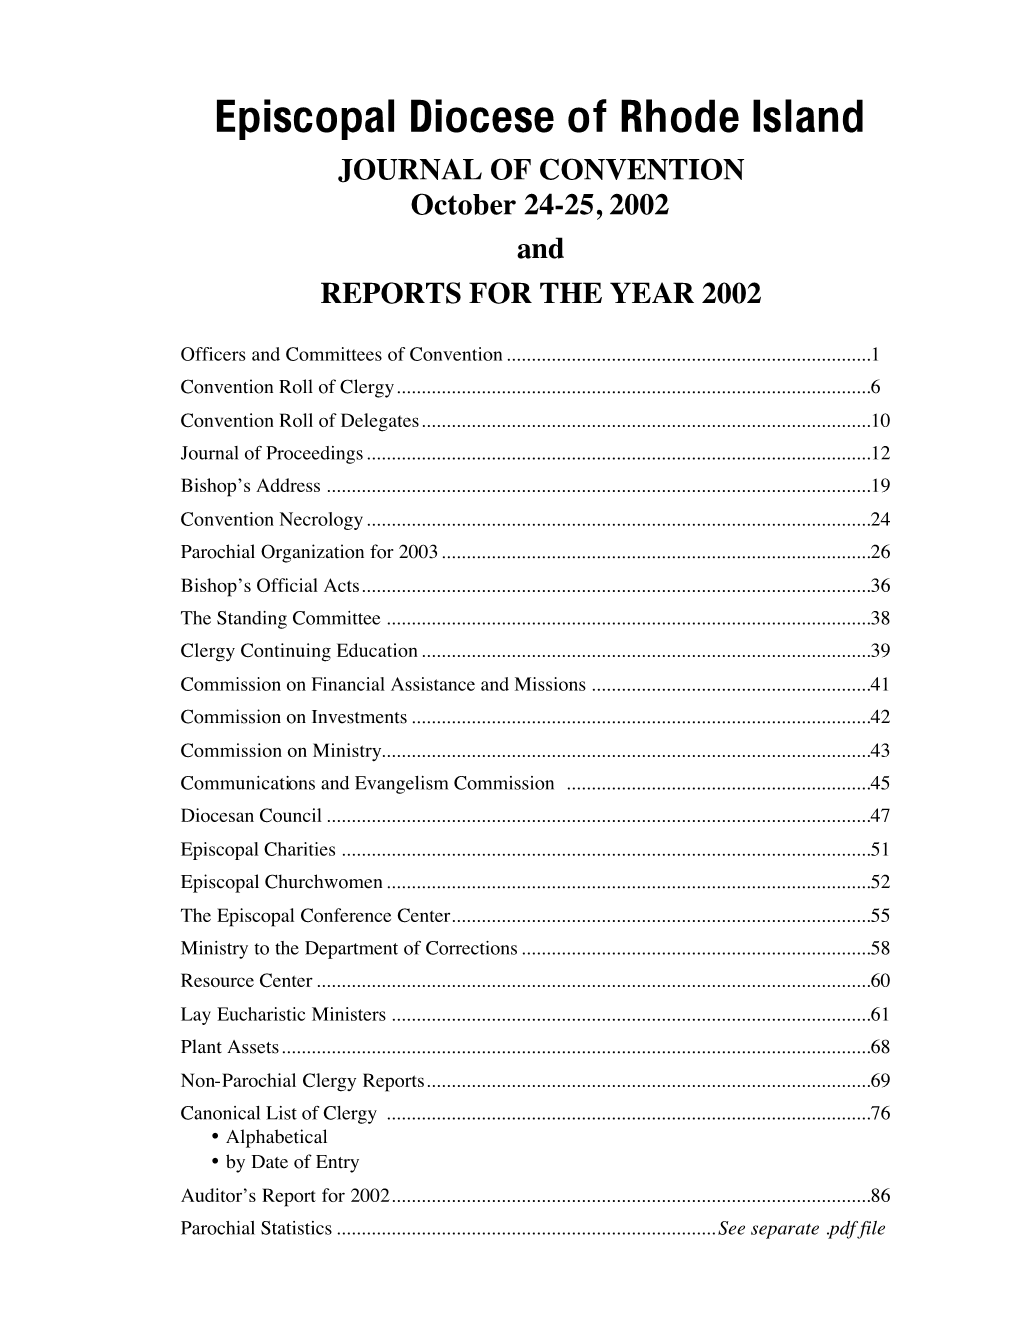 2002 Journal of Convention